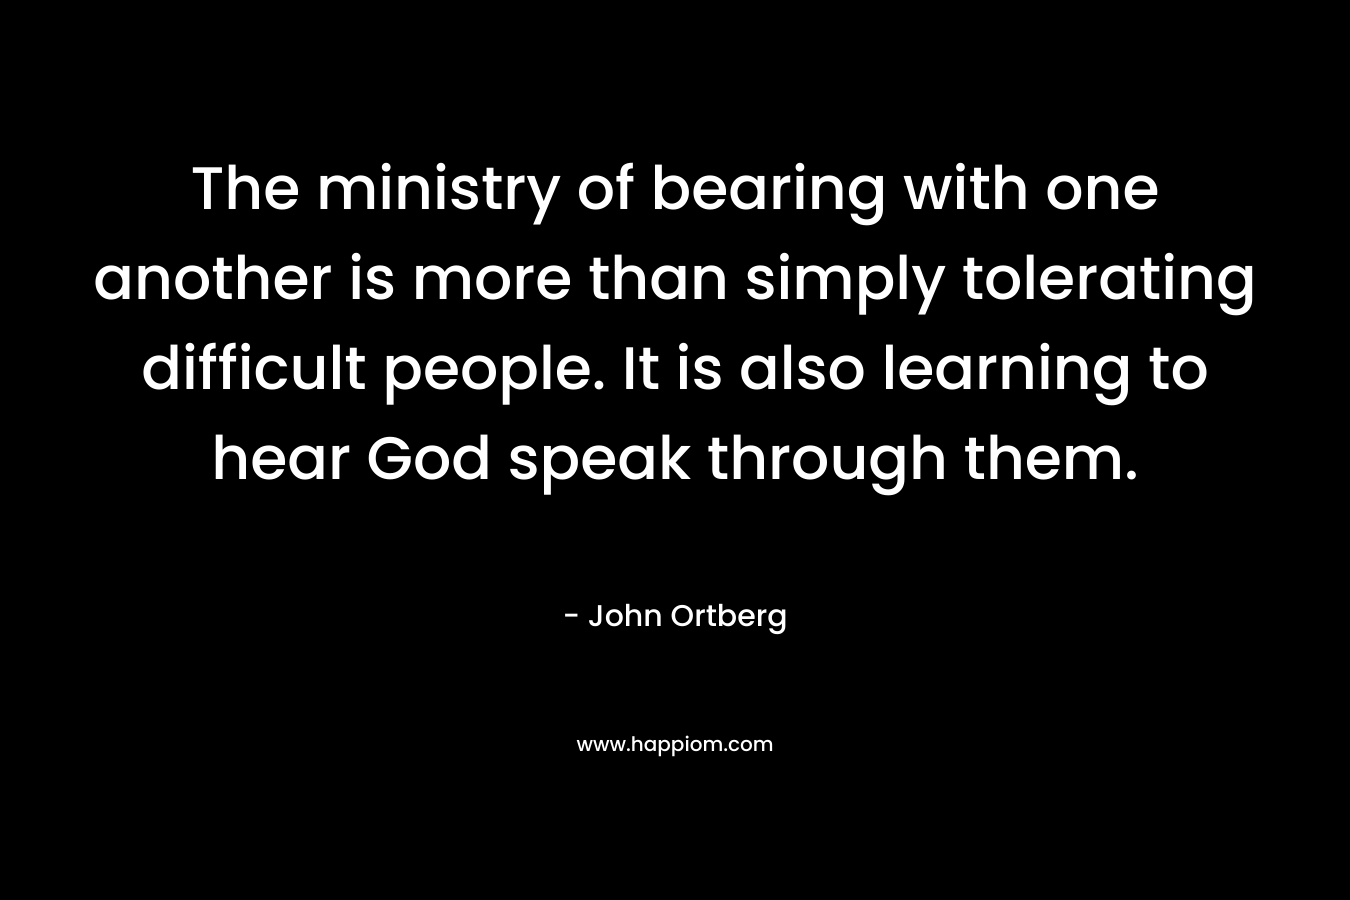 The ministry of bearing with one another is more than simply tolerating difficult people. It is also learning to hear God speak through them.